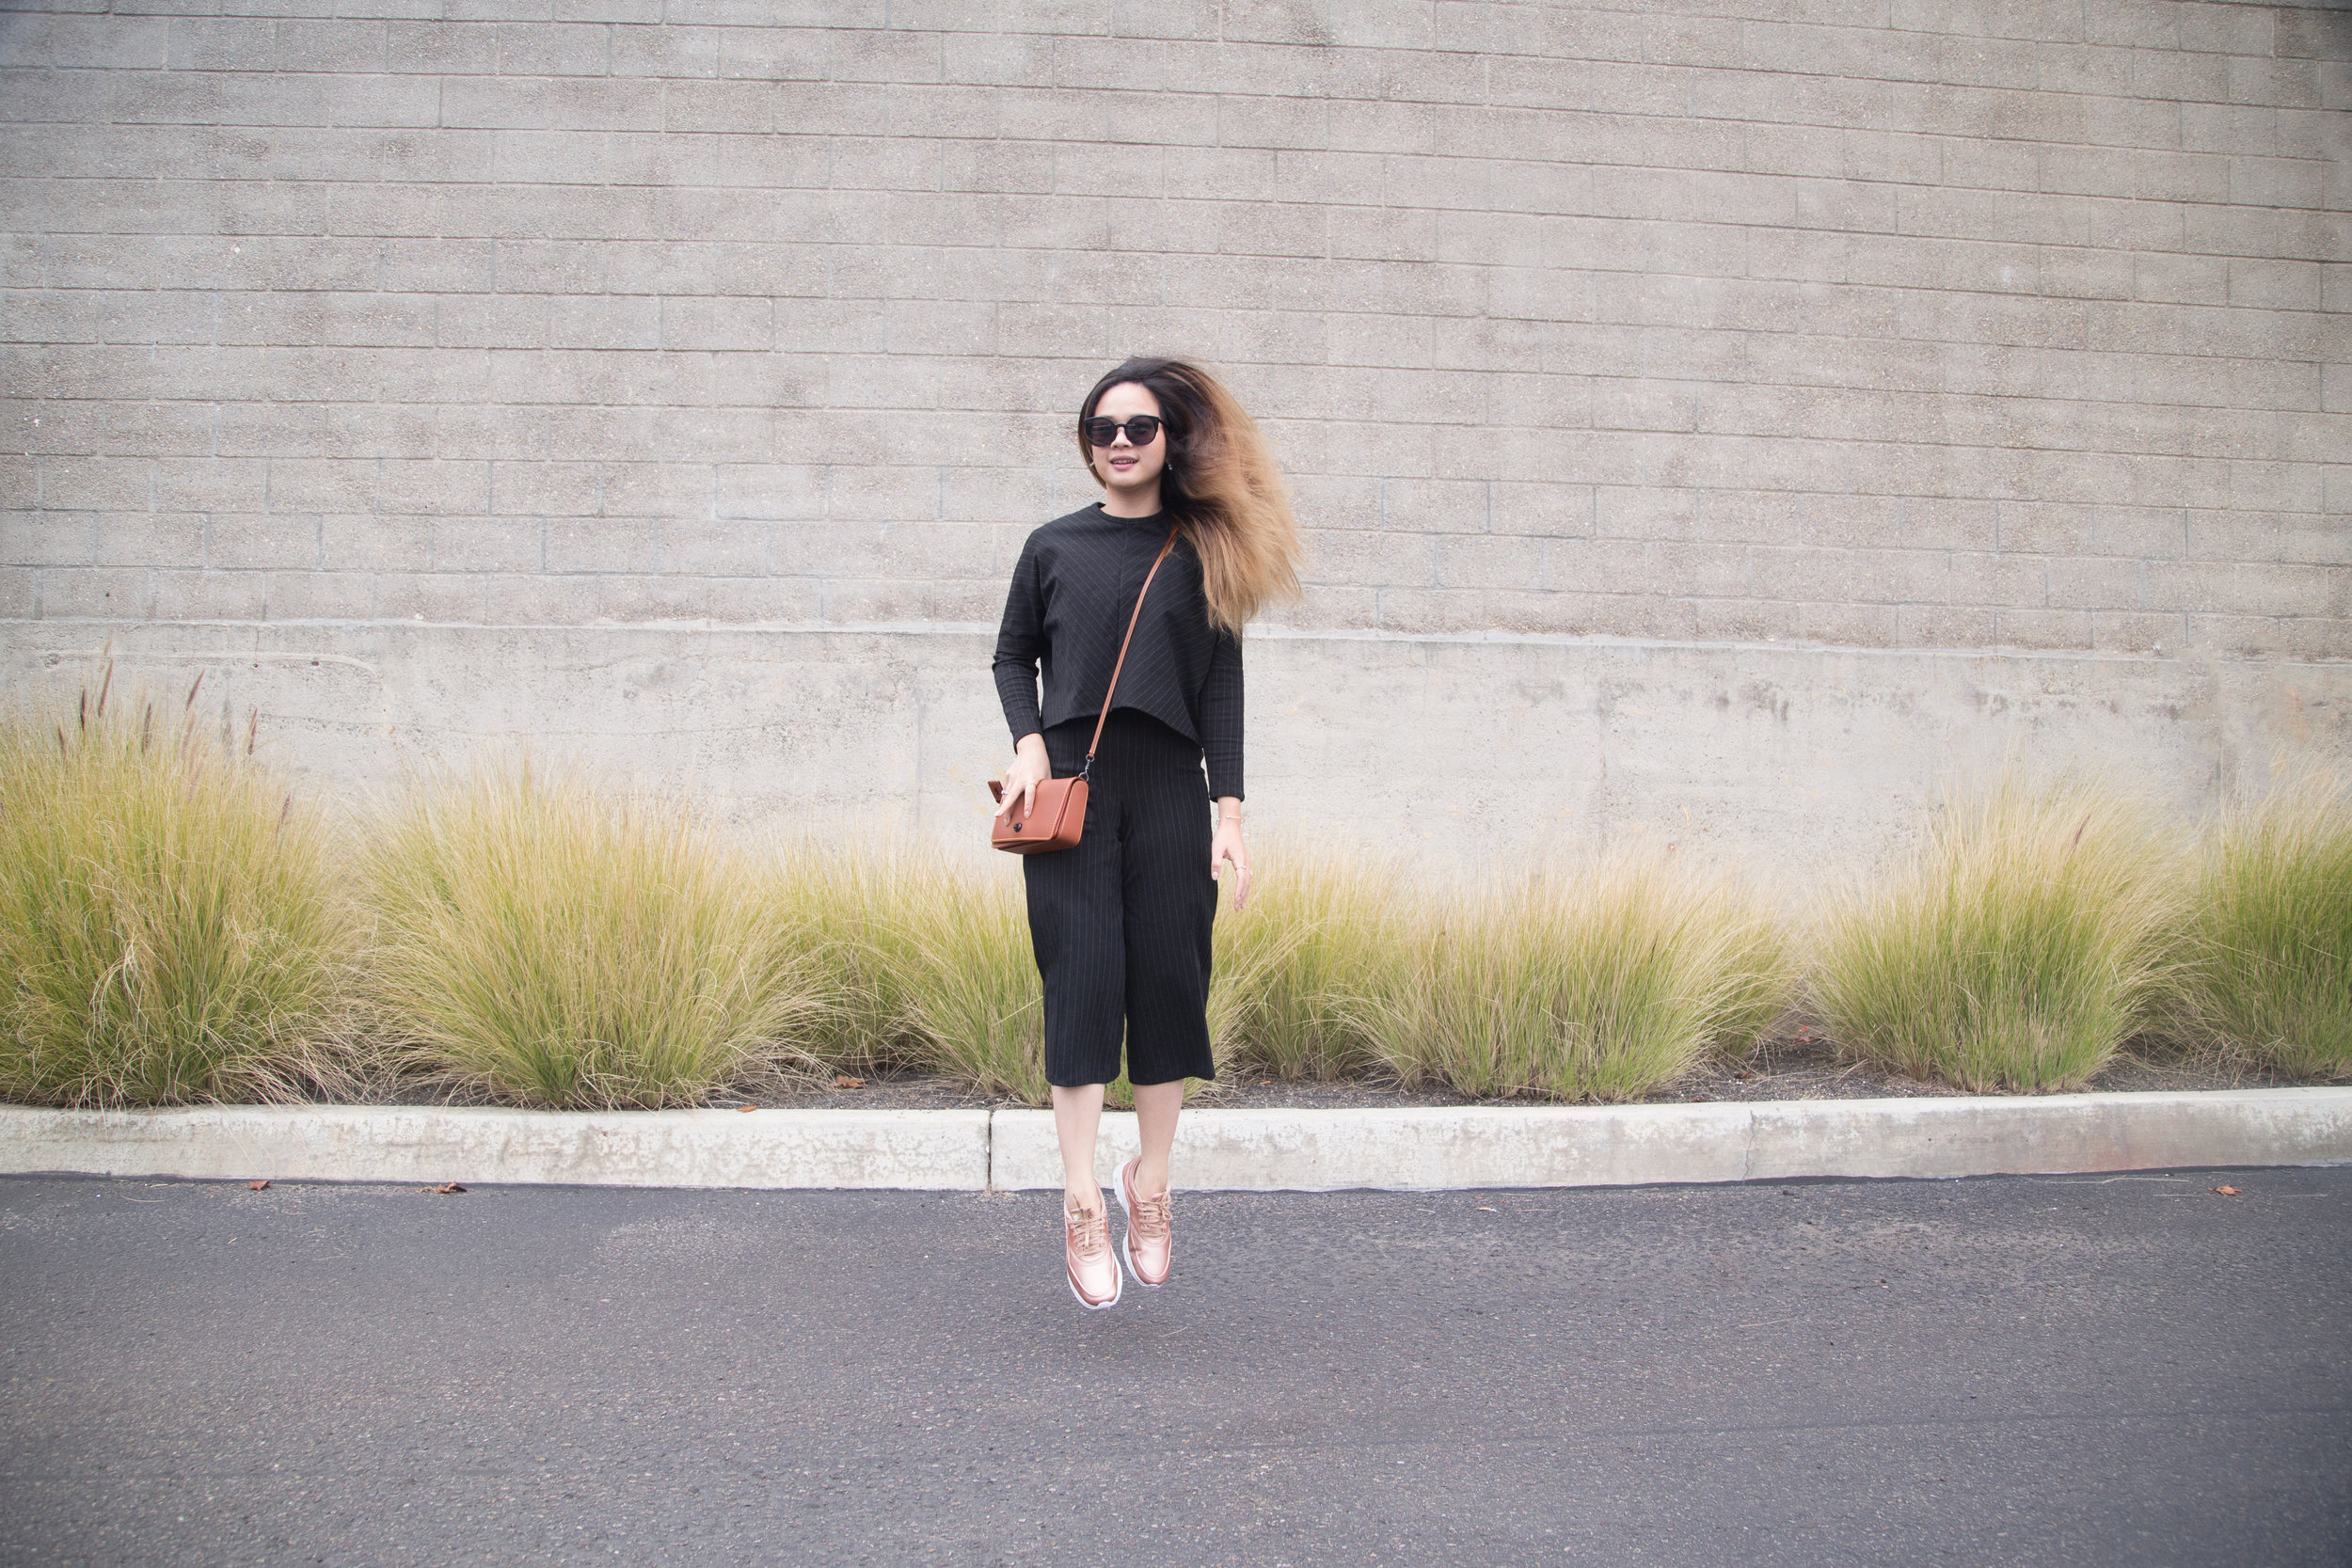 Athleisure For Workwear || How to Wear Sneakers to Work ft. Rose Gold Nike Air Max Thea